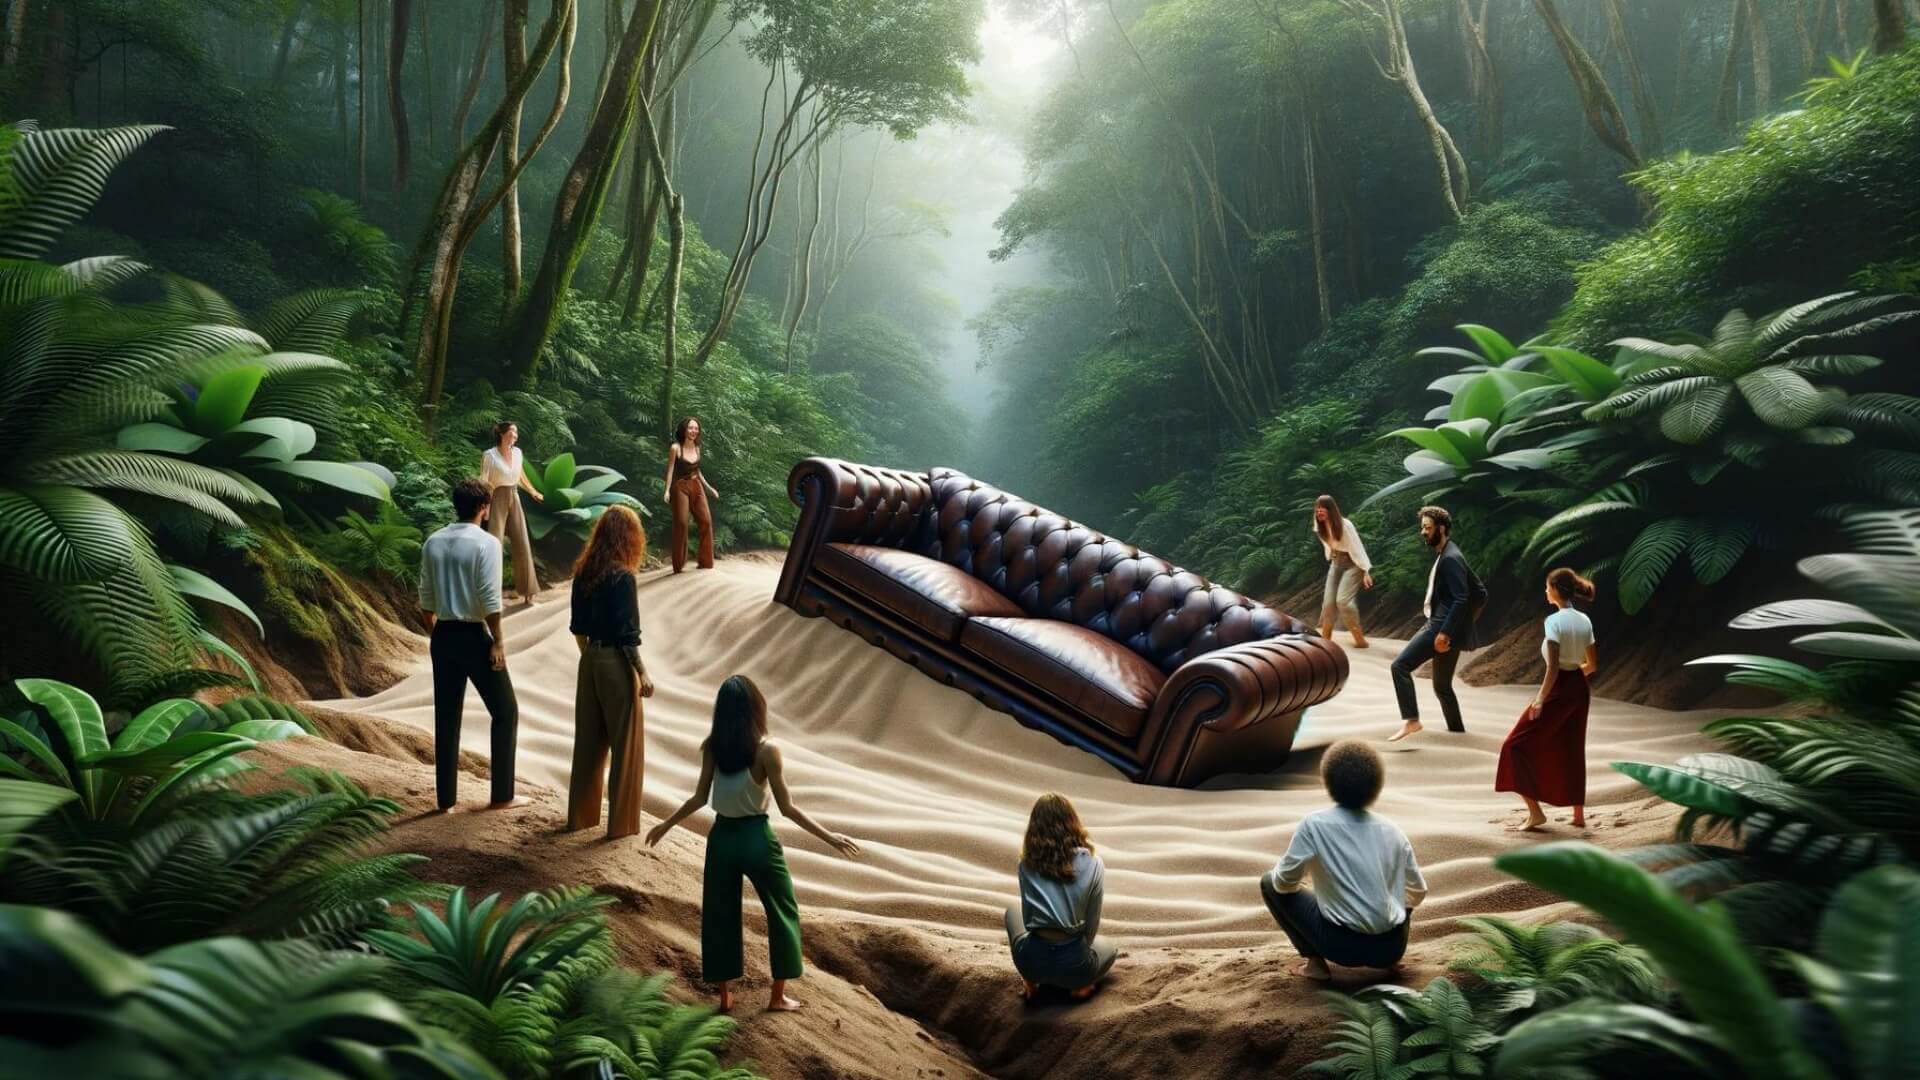 a leather couch being absorbed into a pit of quciksand in a jungle setting as people observe attentively